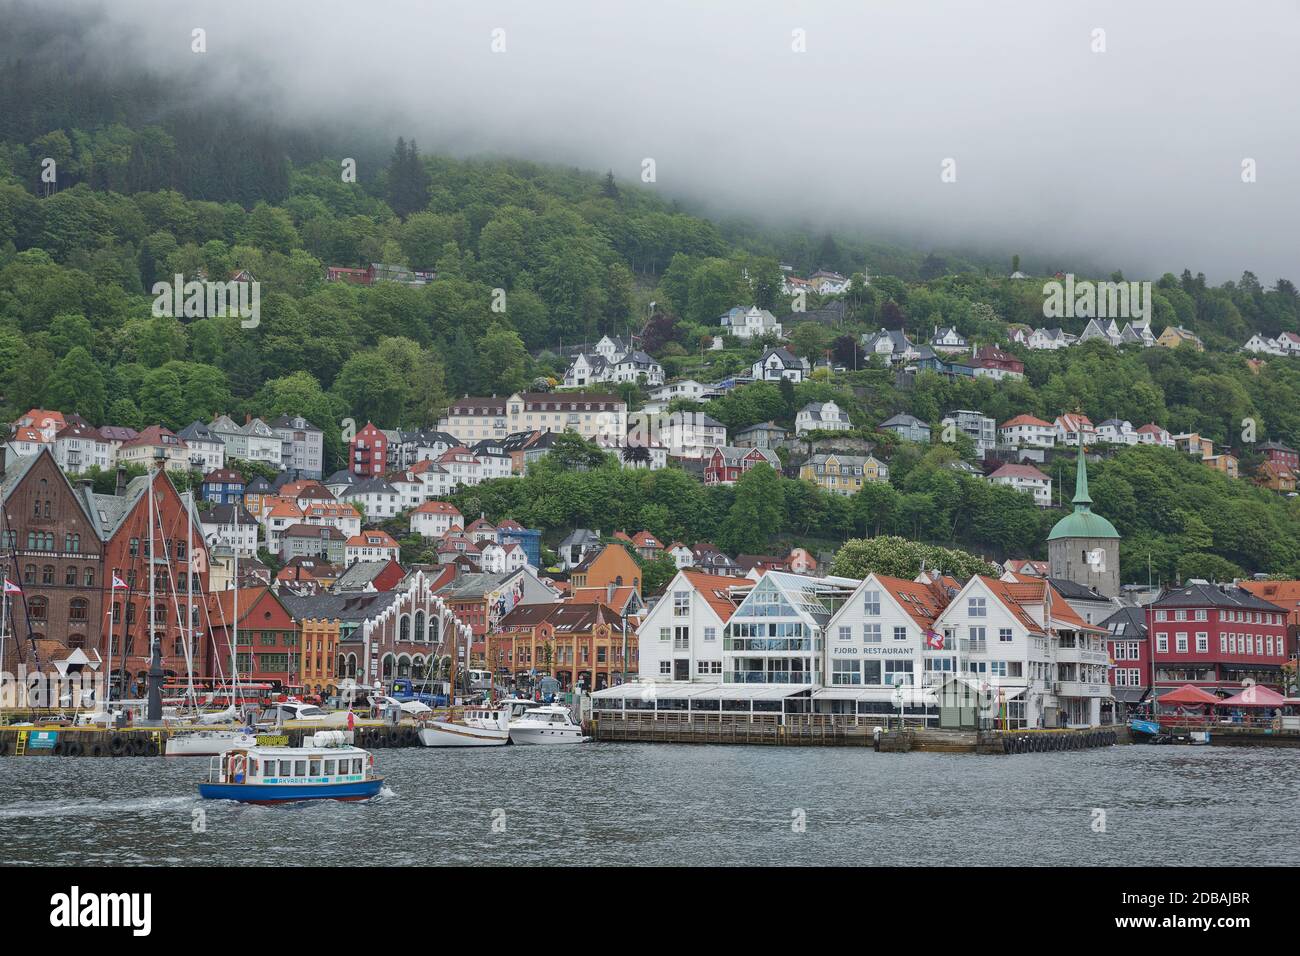 BERGEN, NORWAY - MAY 31, 2017: Old hansaetic wooden houses built in row at wharf of Bergen fjord are UNESCO World Heritage site and very popular for t Stock Photo